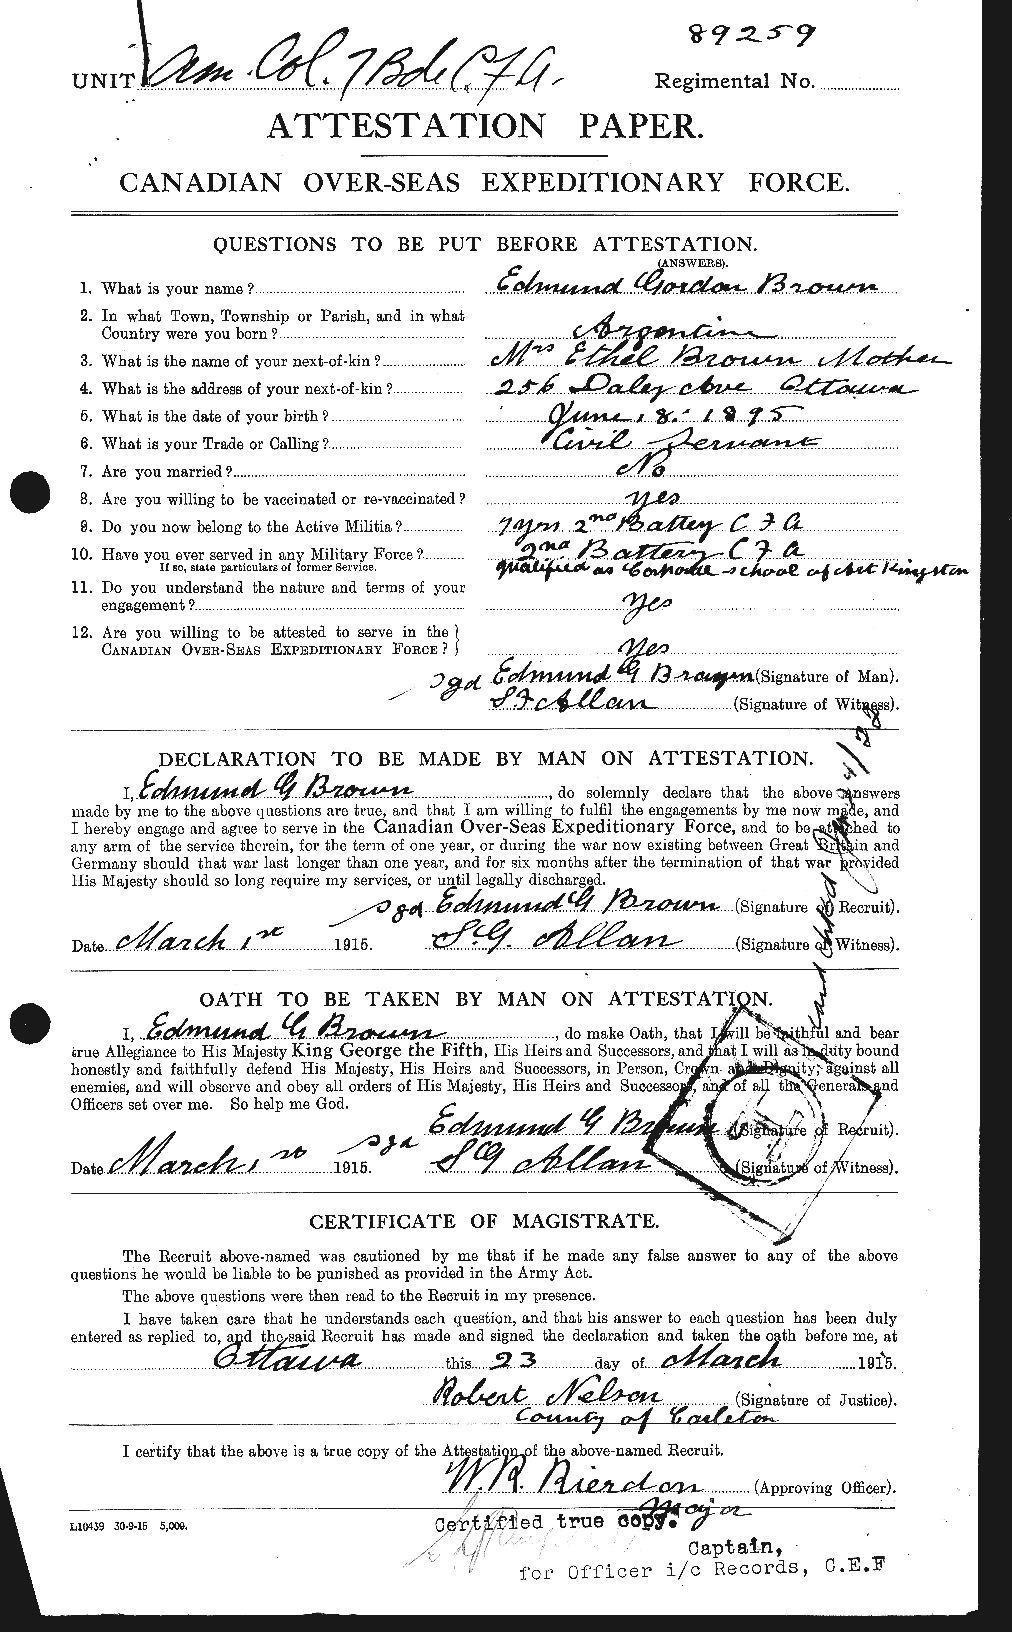 Personnel Records of the First World War - CEF 263328a